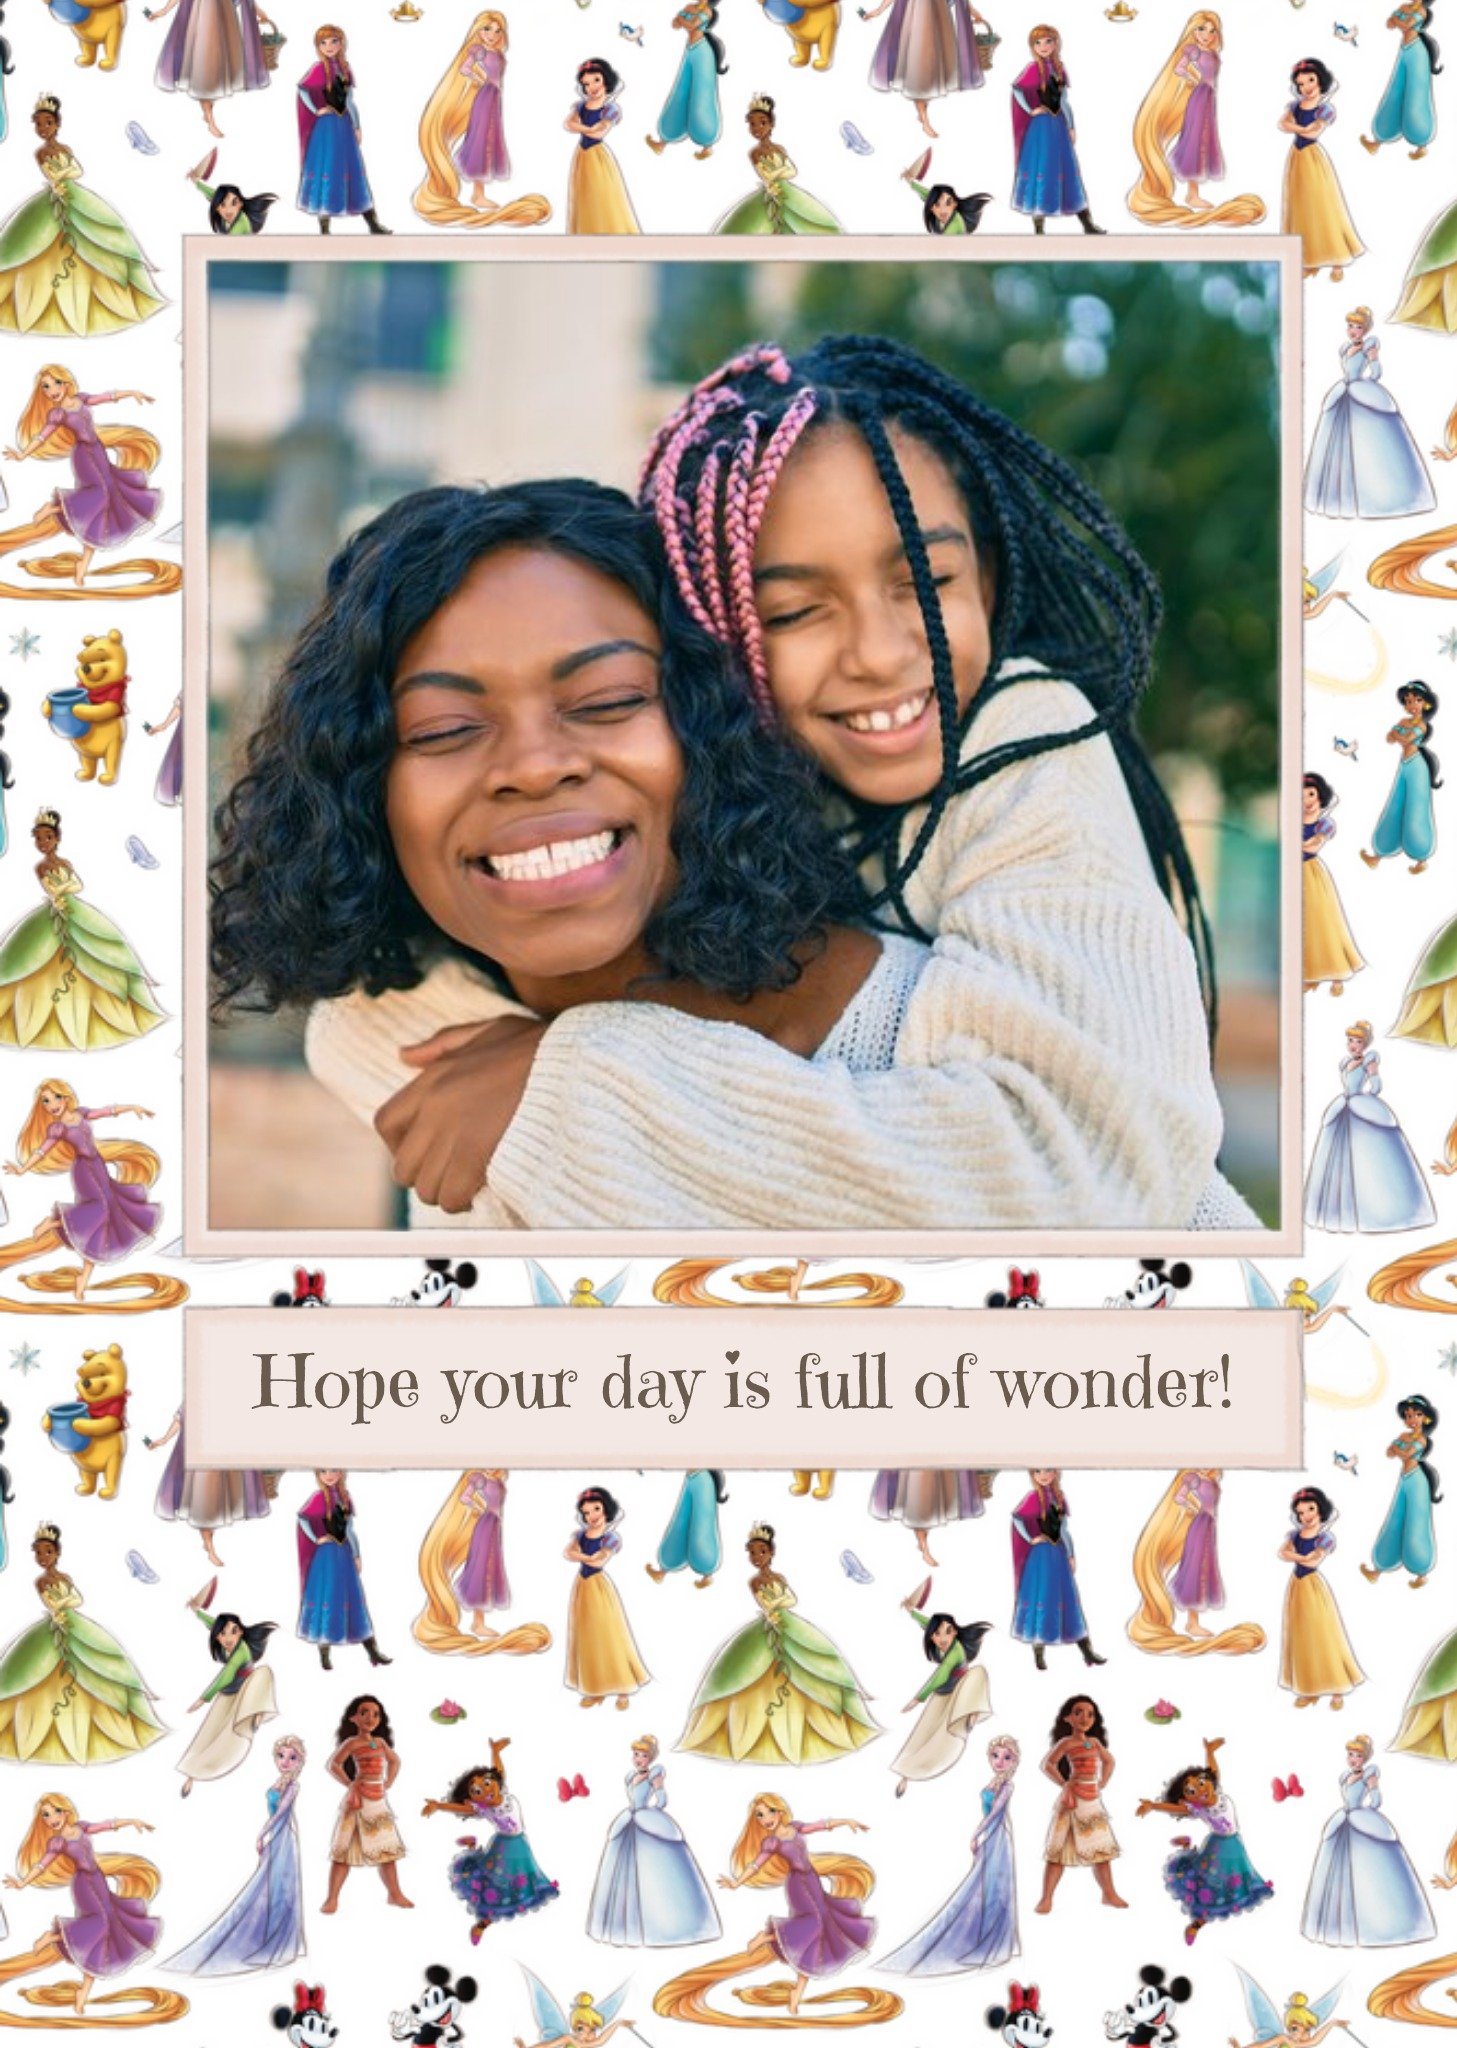 Famous Characters Princesses And Winnie The Pooh Disney 100 Photo Upload Birthday Card Ecard